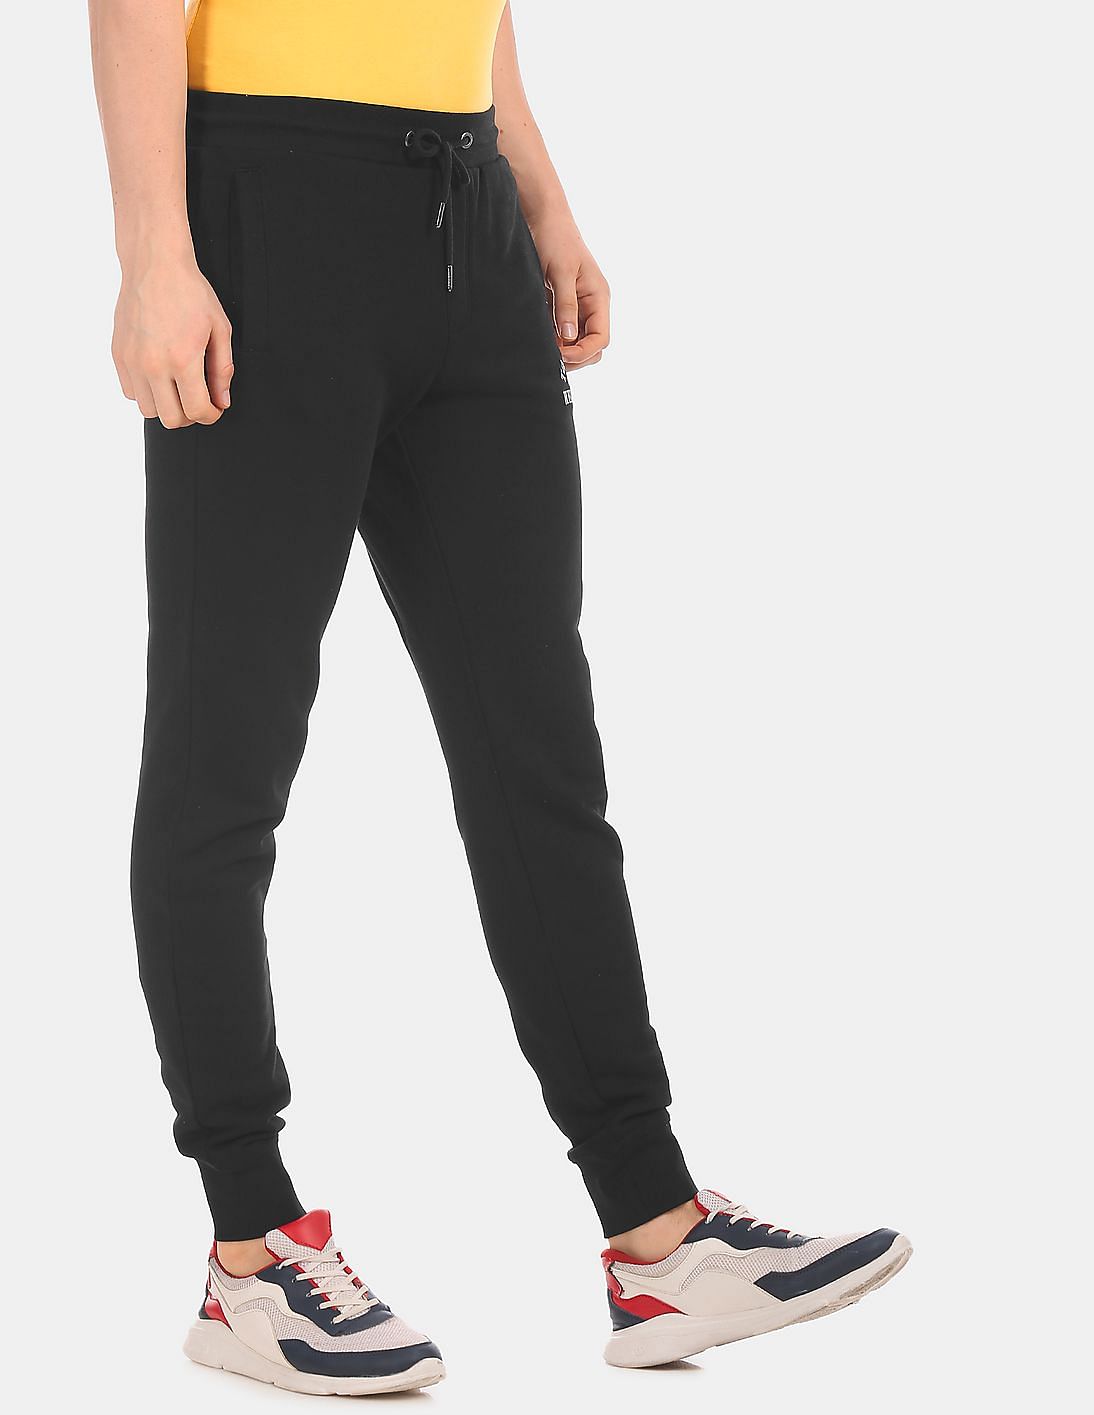 cheap tommy hilfiger joggers